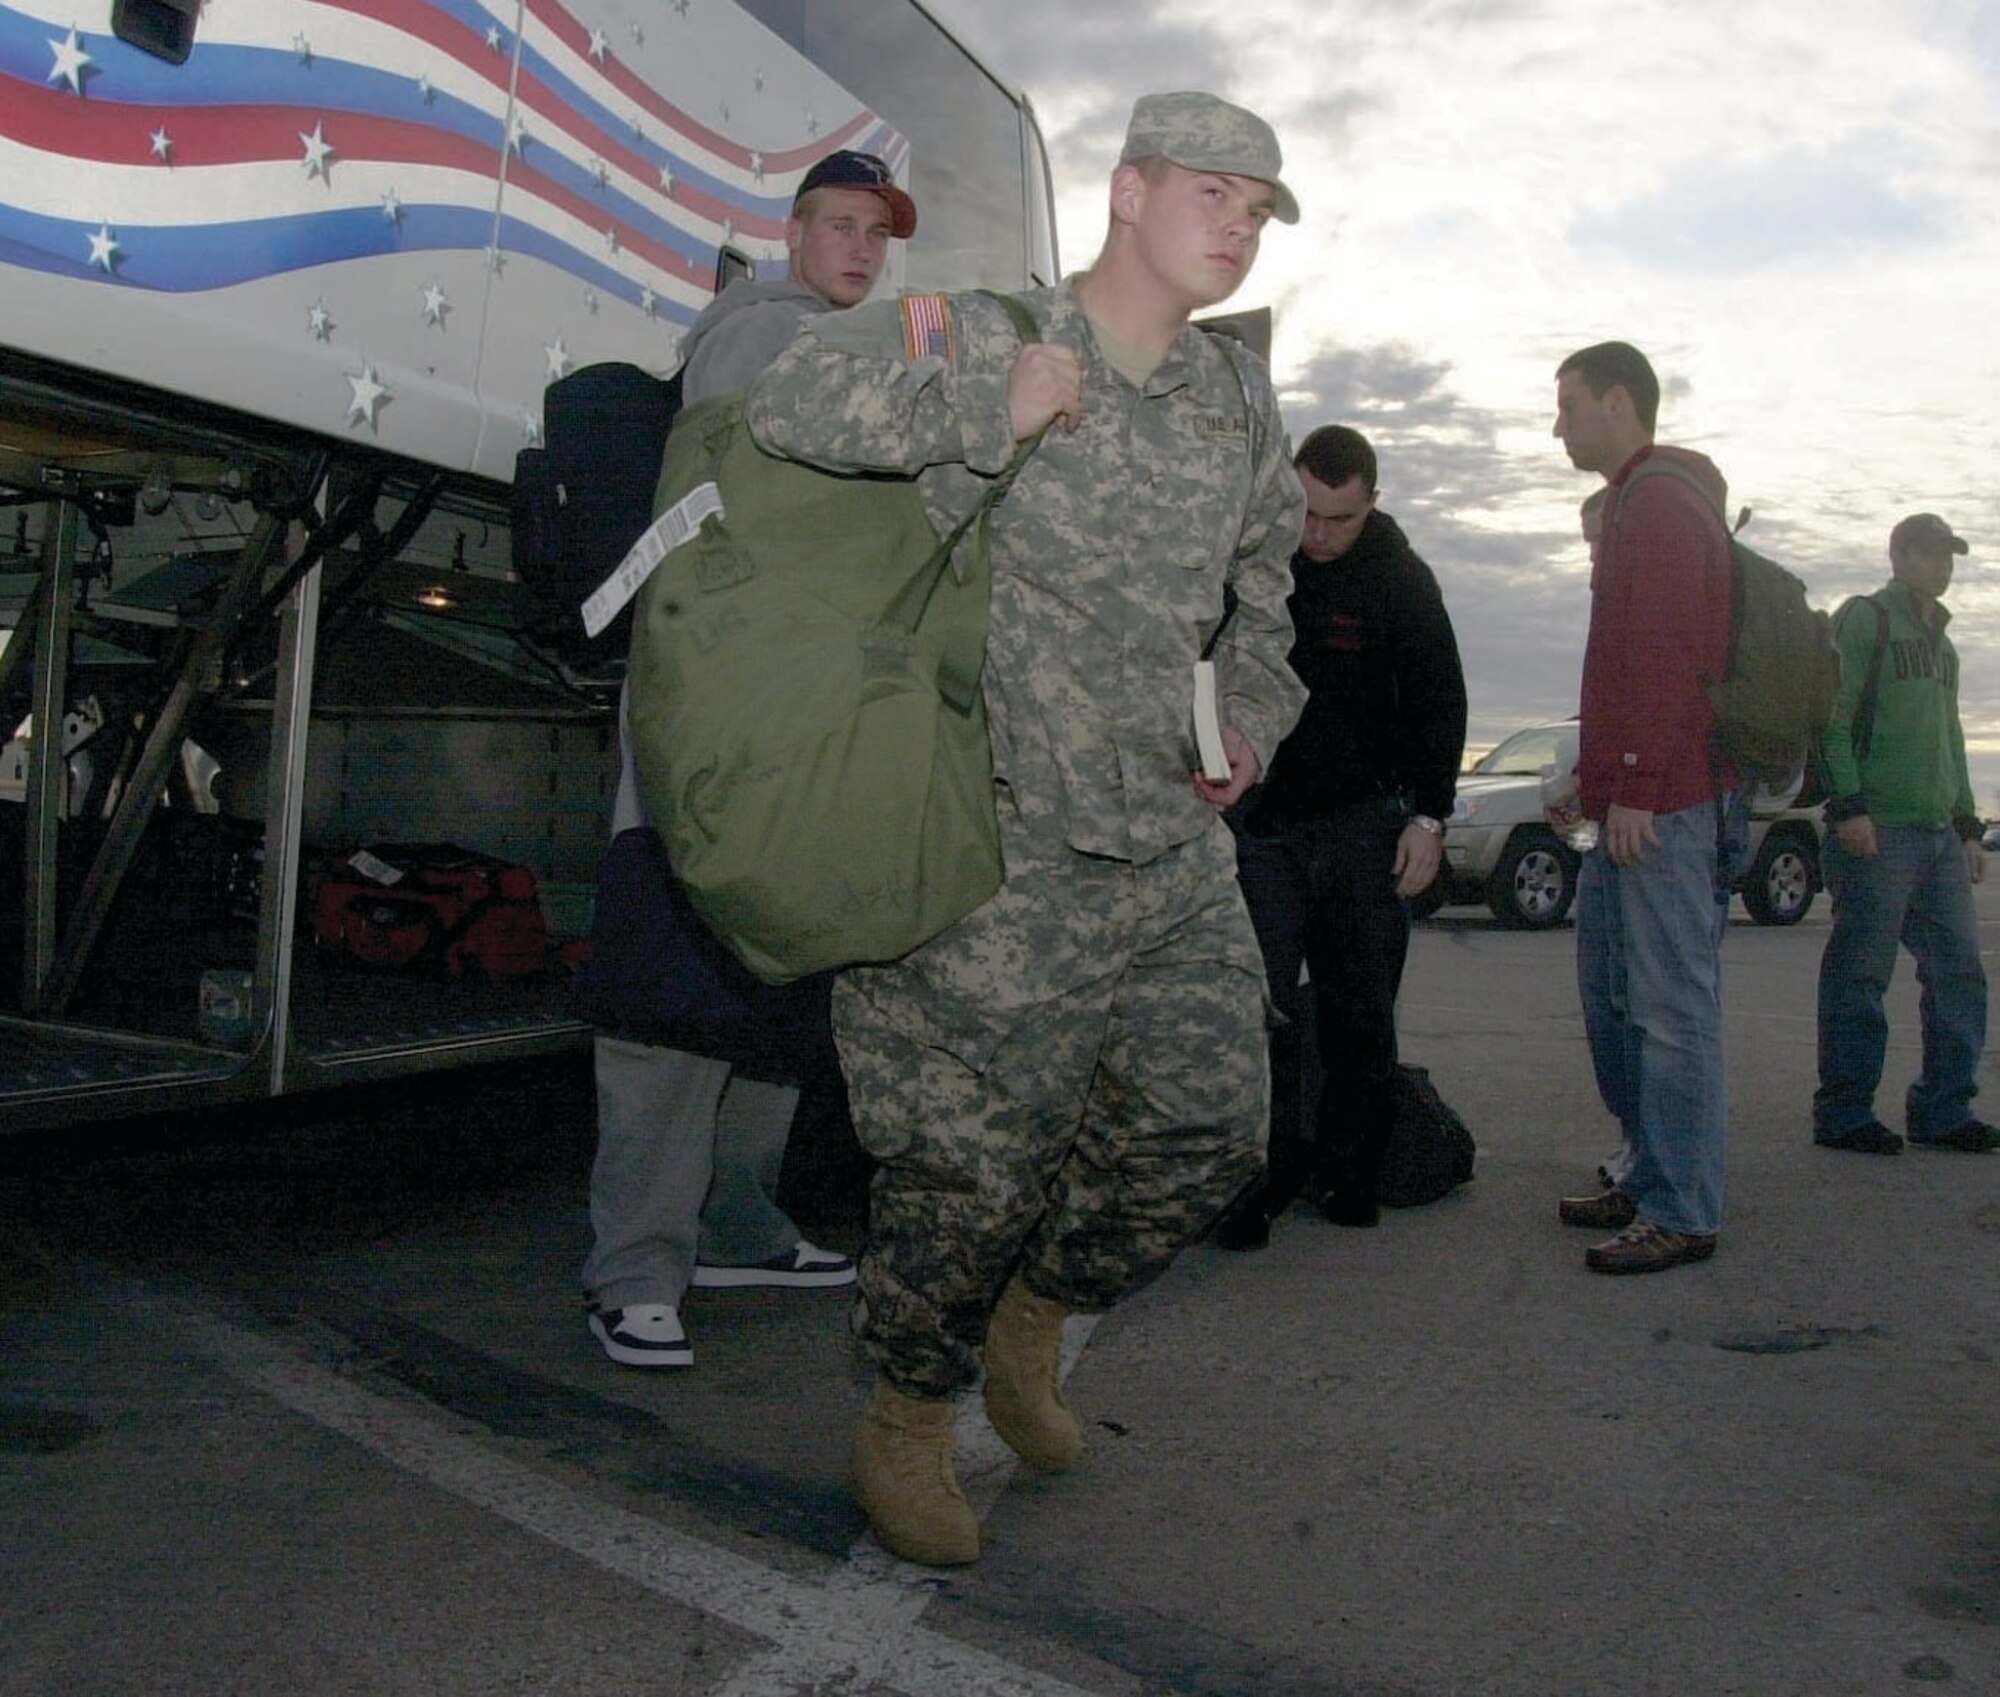 Army Pvt. Christopher Fitzpatrick returns to Goodfellow Tuesday after visiting his family in Davenport, Iowa.  Private Fitzpatrick was one of more than 600 students scheduled to arrive via bus at the base commissary parking lot Tuesday, marking the end of the Holiday Exodus period. 